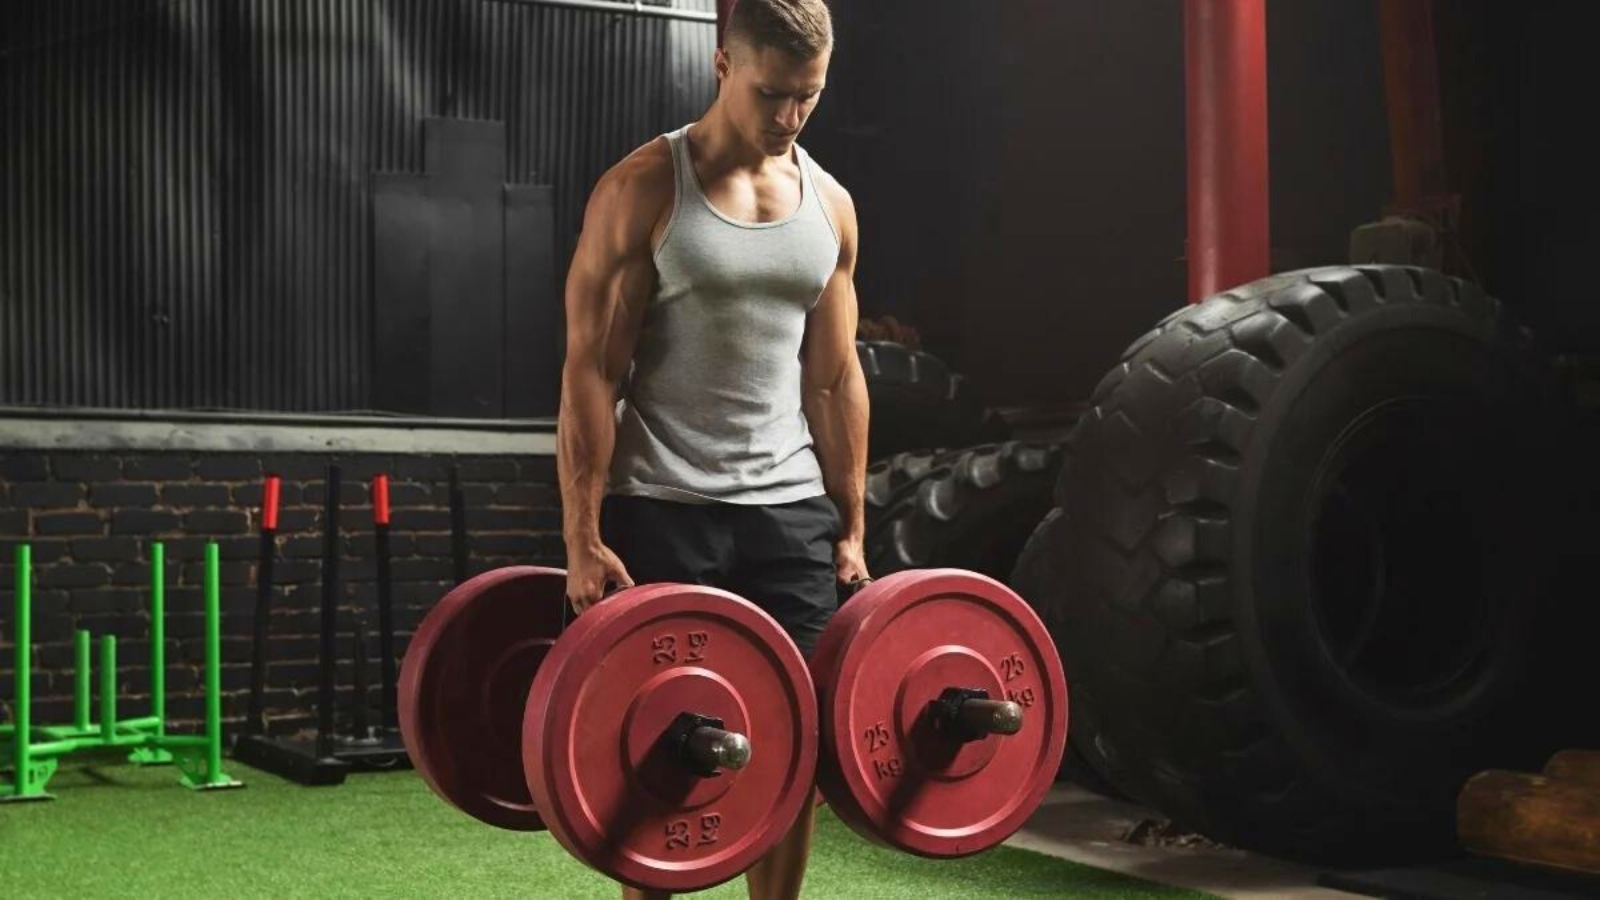 10 Best Exercises for Massive Forearms You Should Try Today - Farmers Carry/Walk